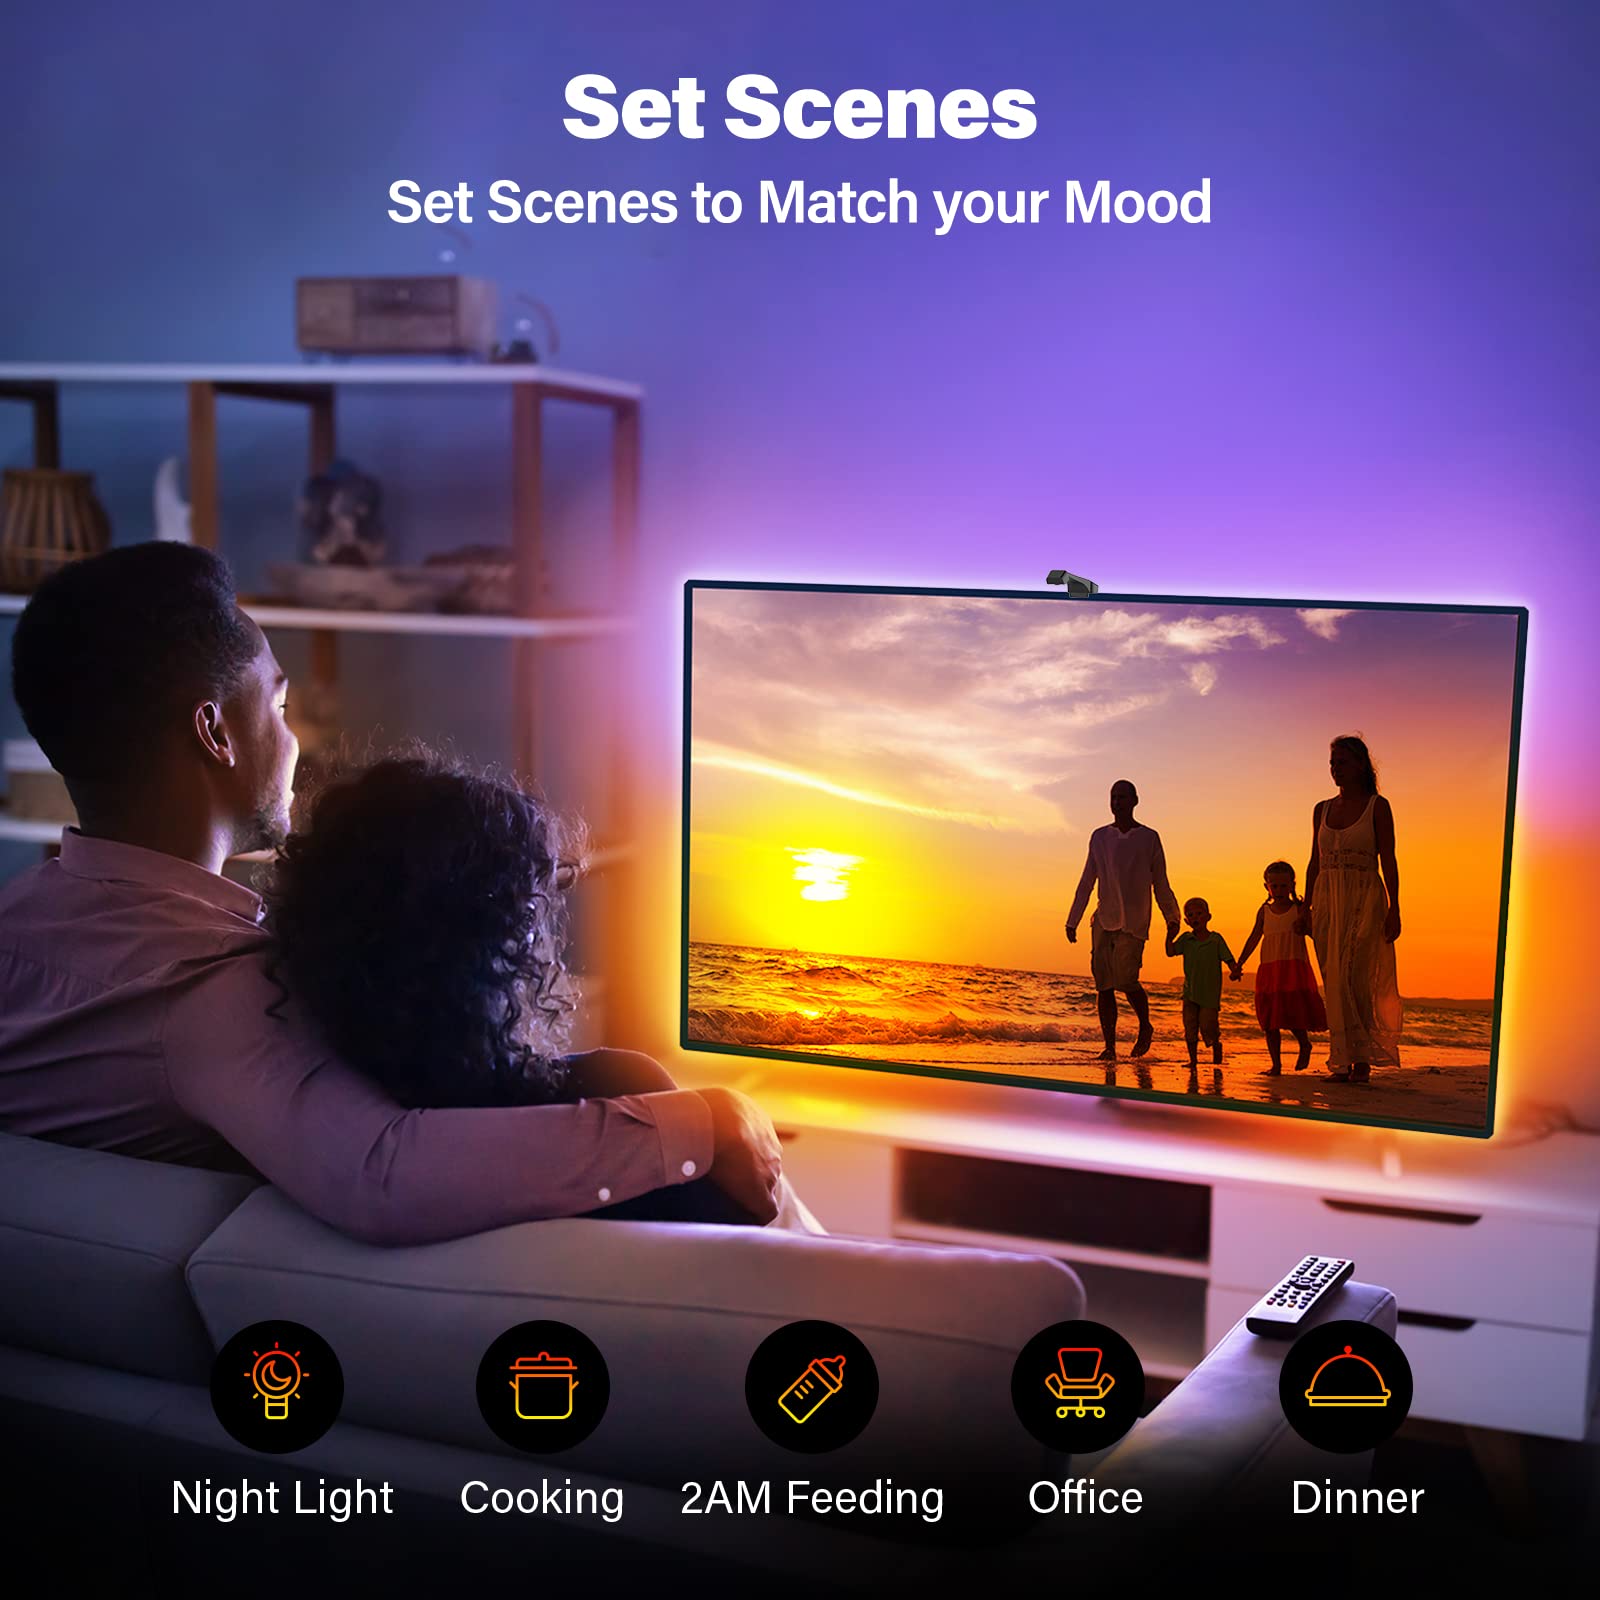 Sengled Ambient TV LED Backlights with Camera, Smart Strip Light for 50-60 inch TVs PC, (TV Sync Supports Off-line) WiFi RGB Lights, Works with Alexa & Google Assistant, App Control, Vision G2